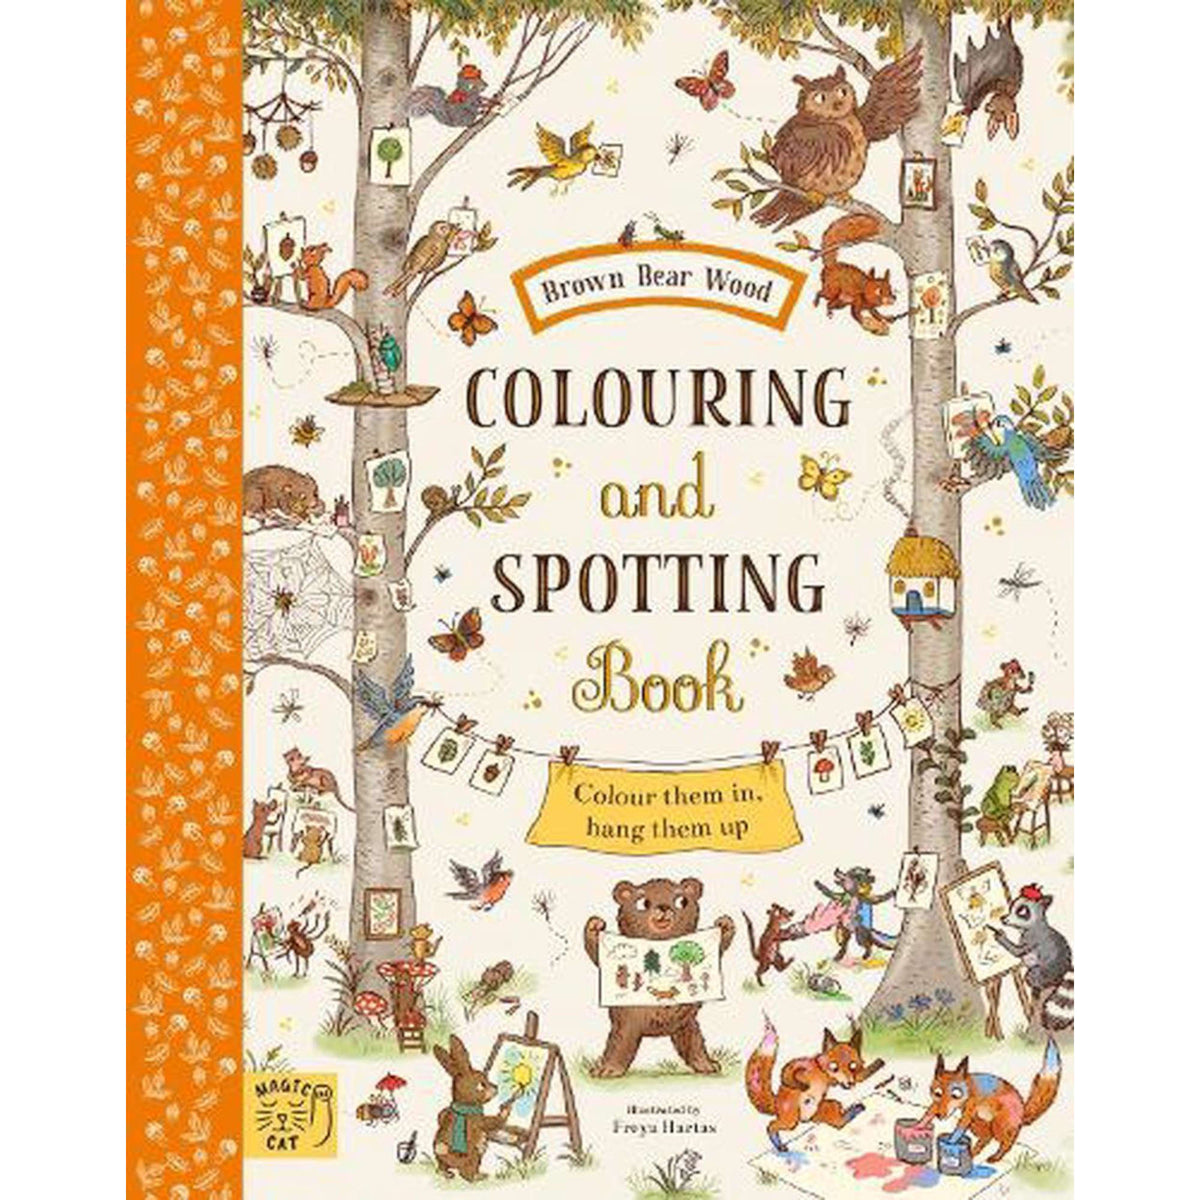 Brown Bear Wood: Colouring & Spotting